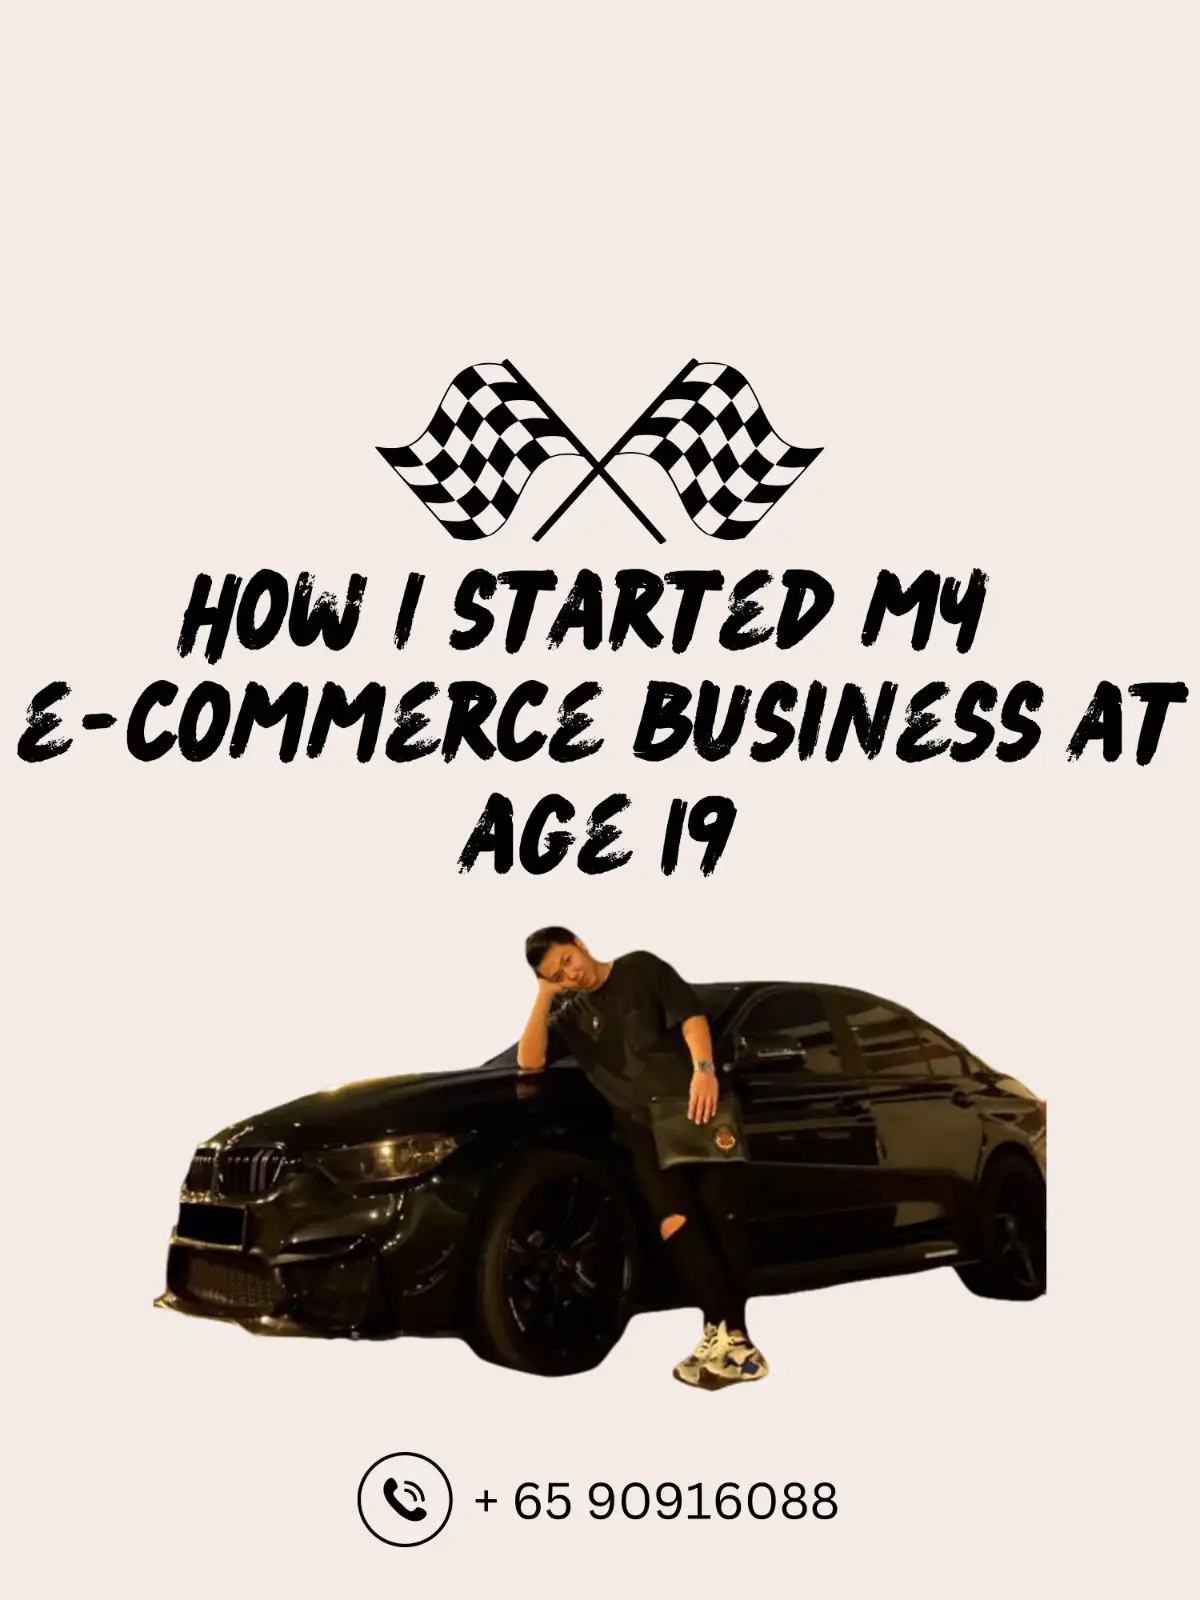 How I started my e-commerce business at age 19 🤩💰's images(0)